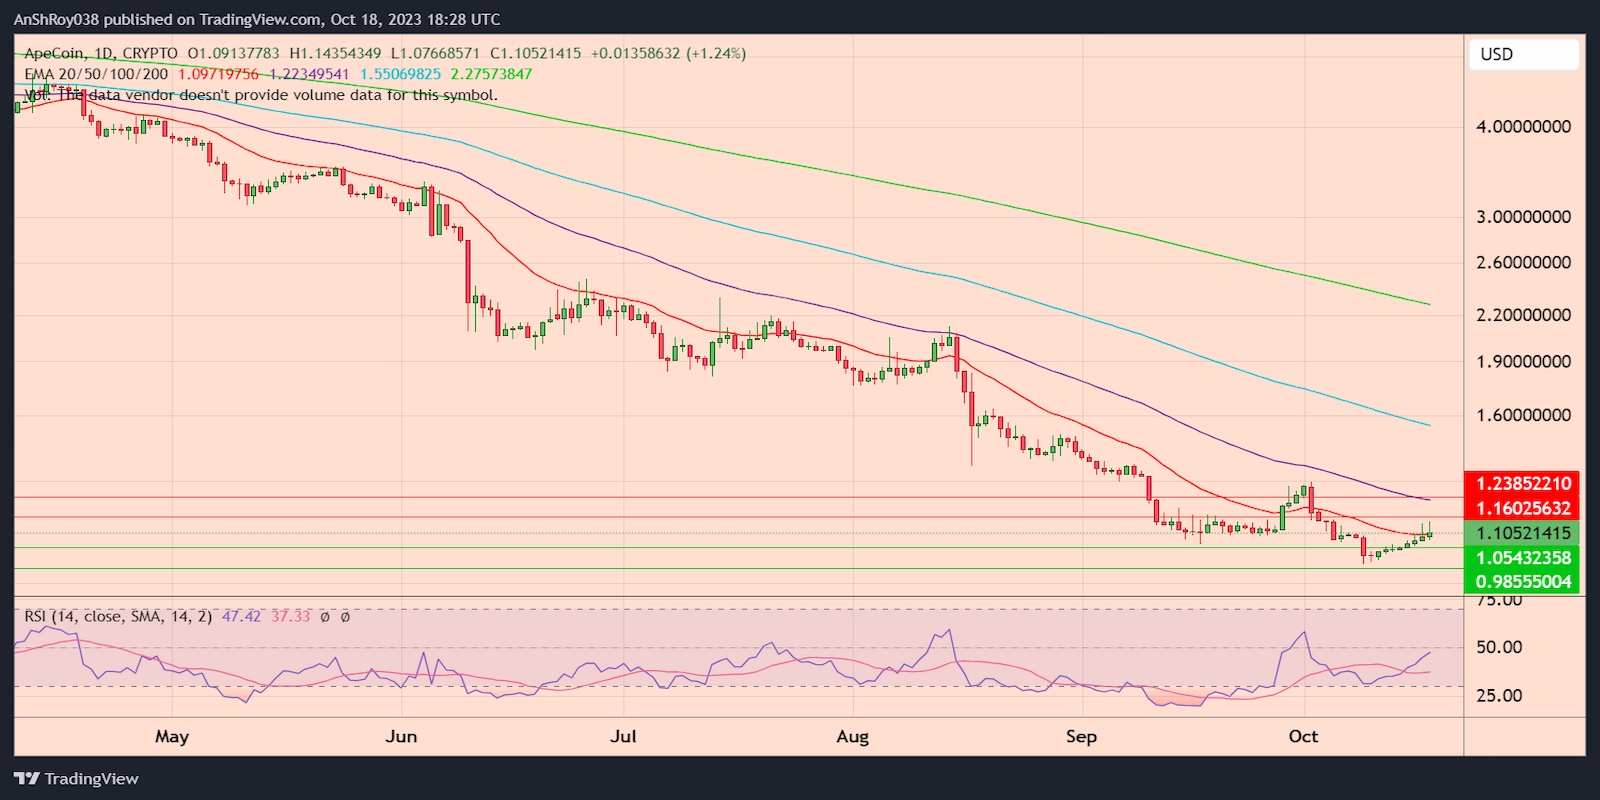 APEUSD daily price chart with RSI. 